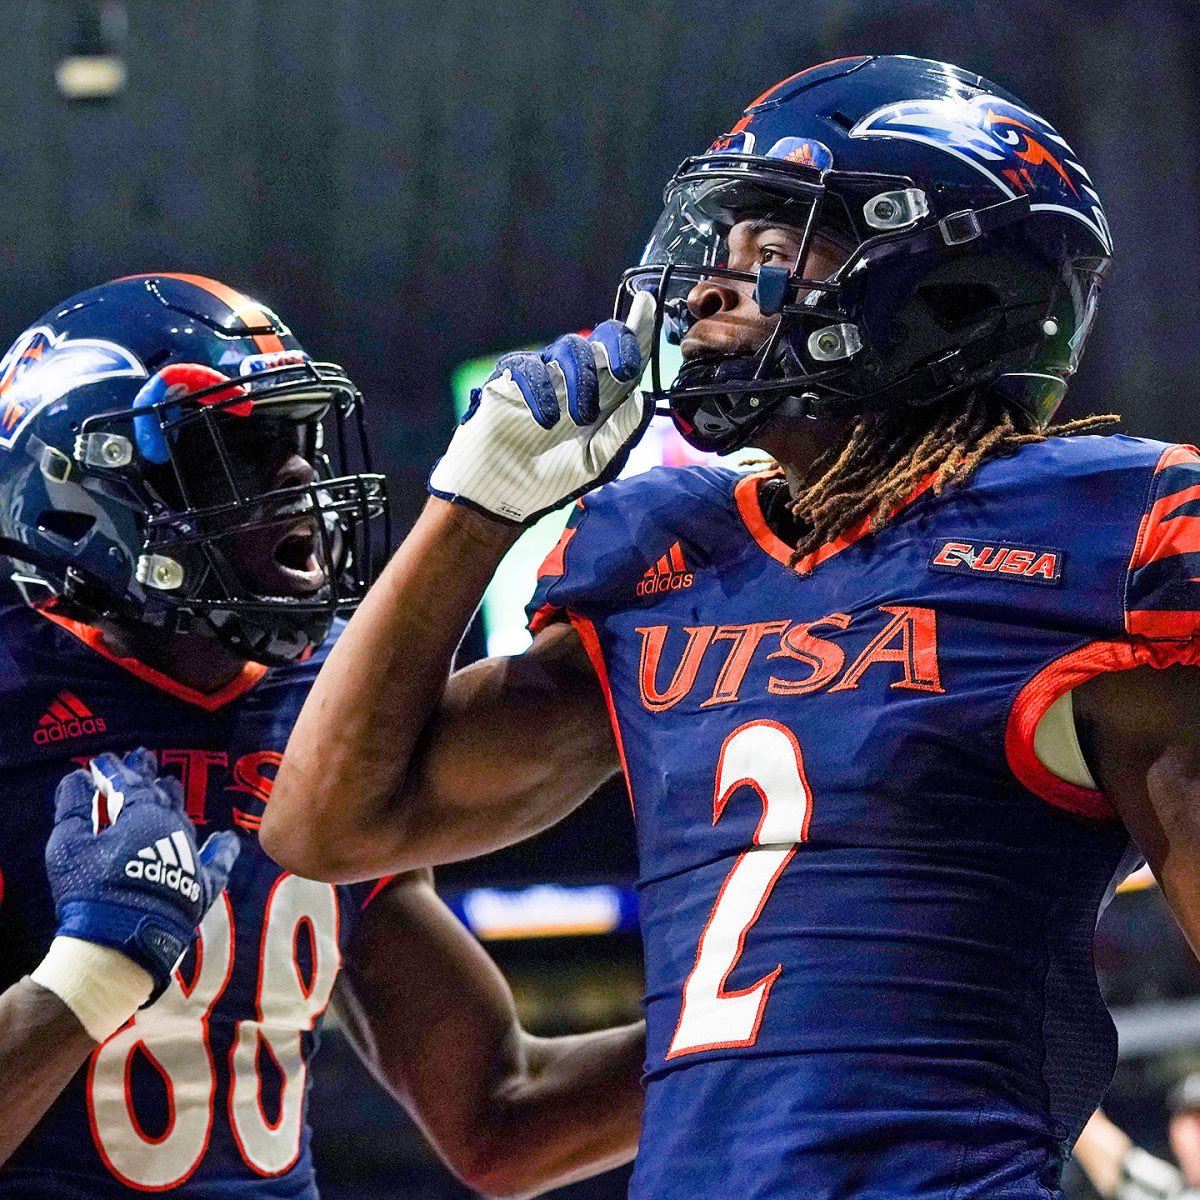 #AGTG After a great conversation with @coachjordan03 and @CoachJessLoepp I'm Blessed to receive an offer from UTSA ! #BirdsUp